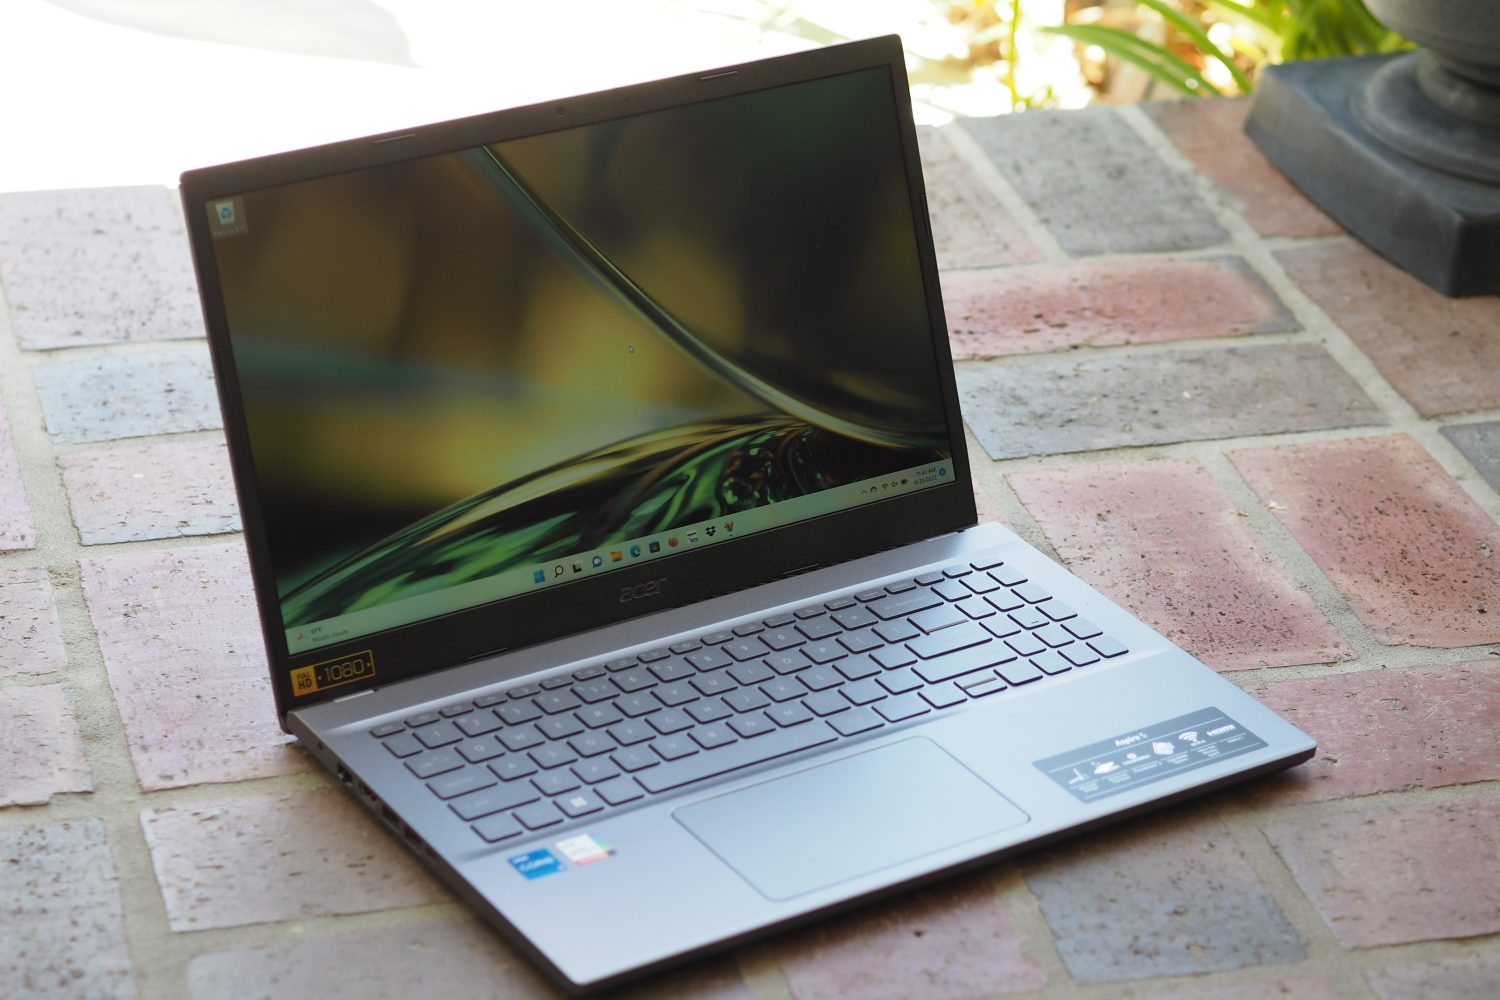 Acer Aspire 5 (2022) review: Just enough improvements